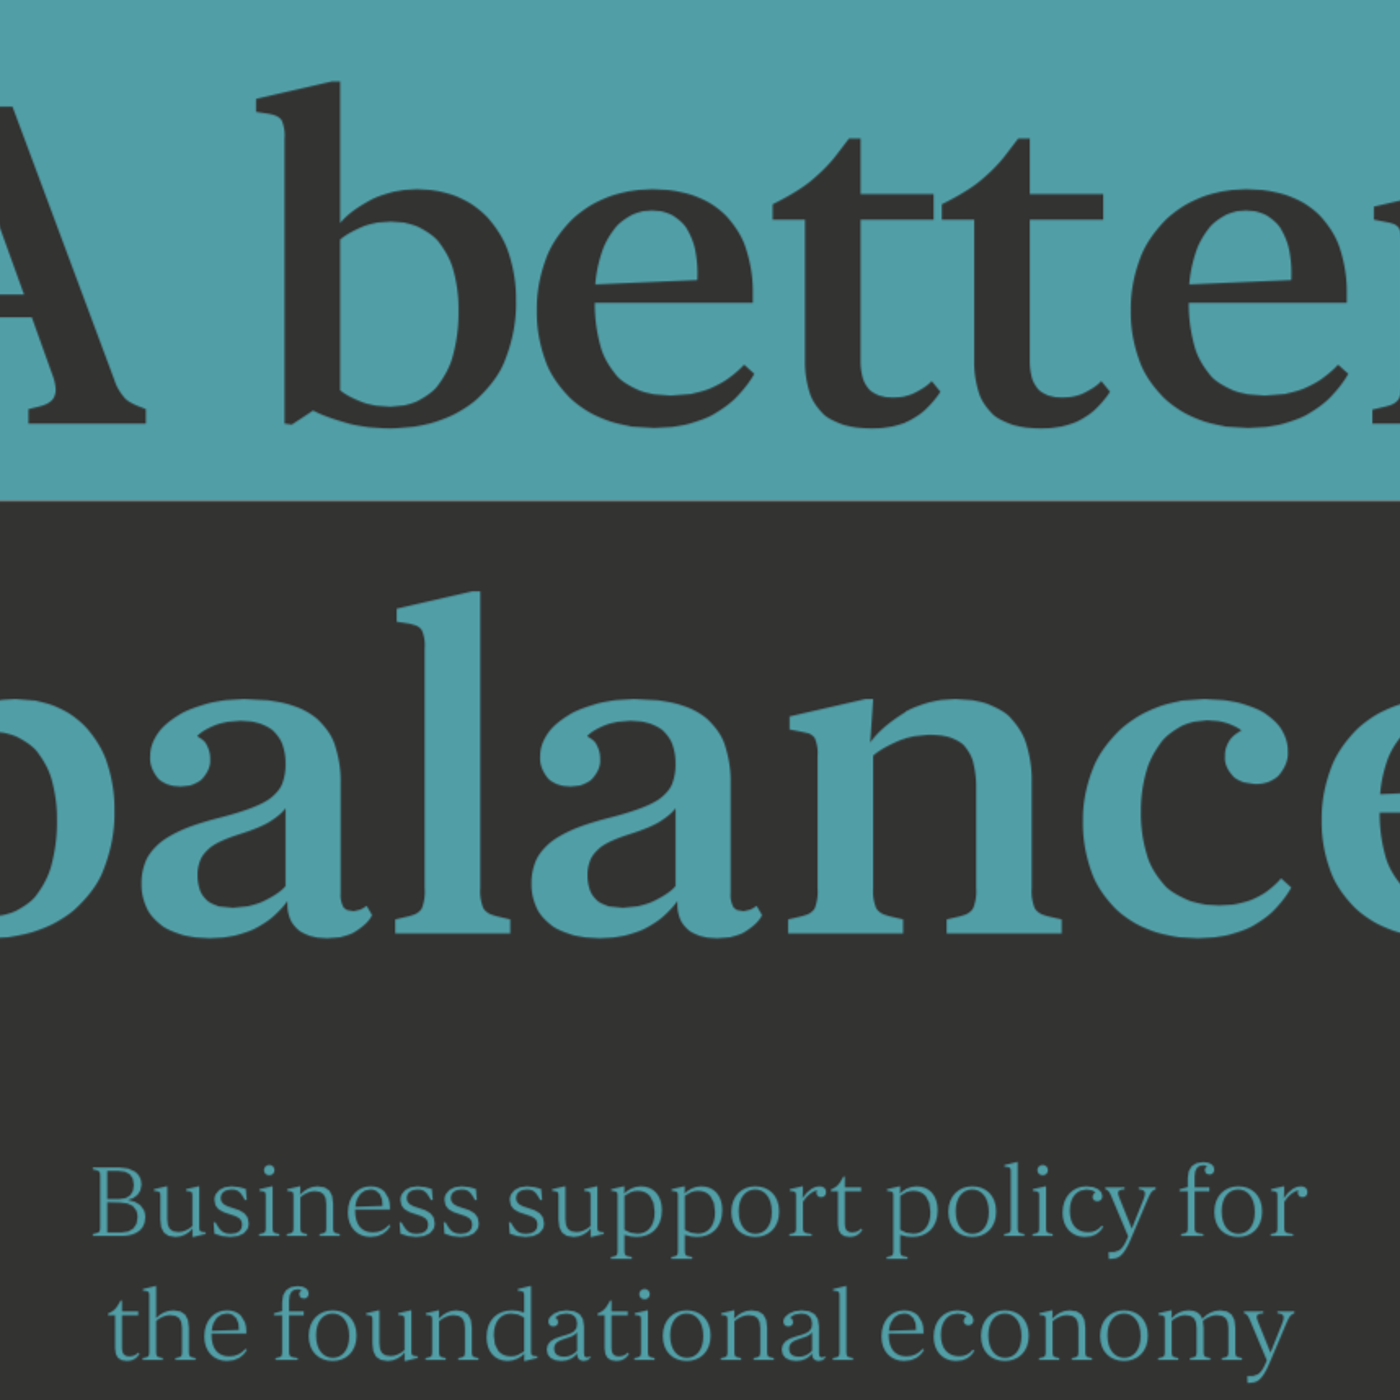 02/03/2021 IWA Report Launch: Business Support for the Foundational Economy